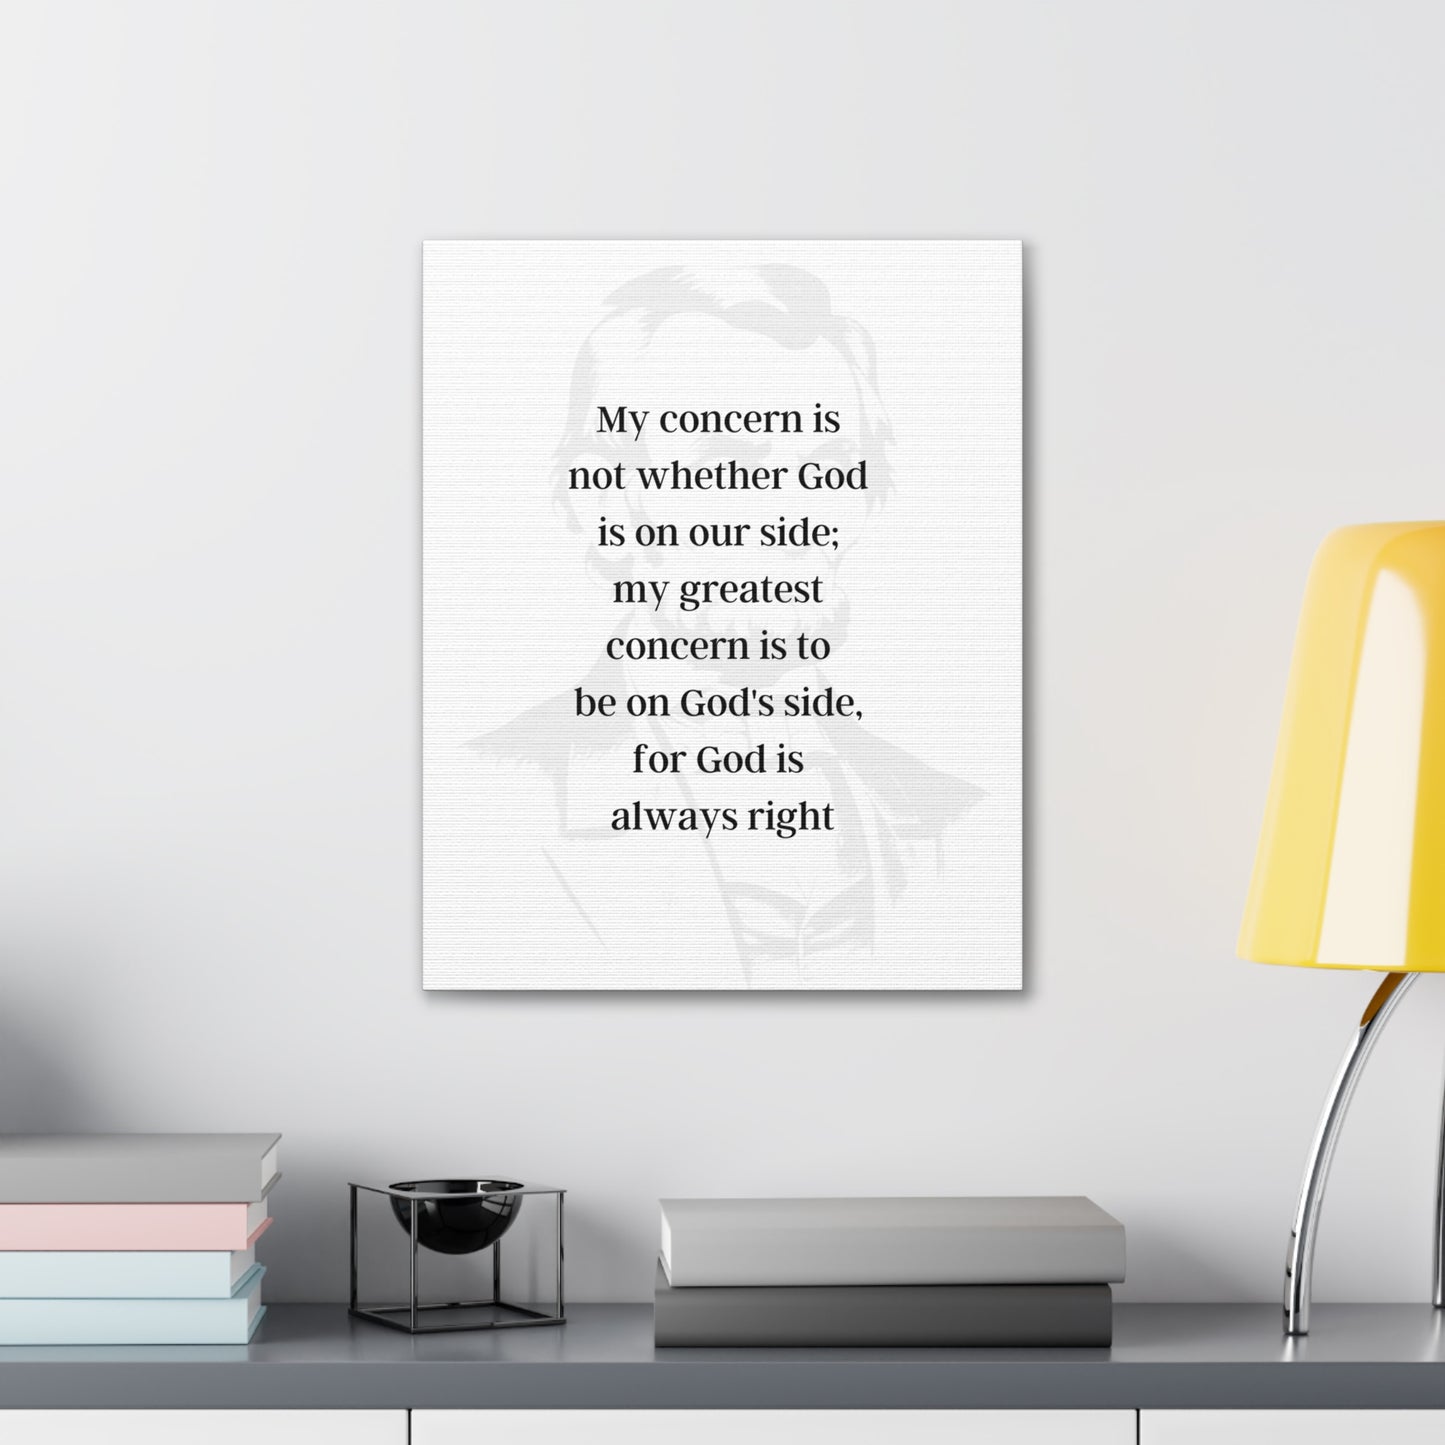 Abraham Lincoln Quote 2, Canvas Art, Light Print with Black Lettering, 16th President of the United States, American Patriots, AI Art, Political Art, Canvas Prints, Presidential Portraits, Presidential Quotes, Inspirational Quotes